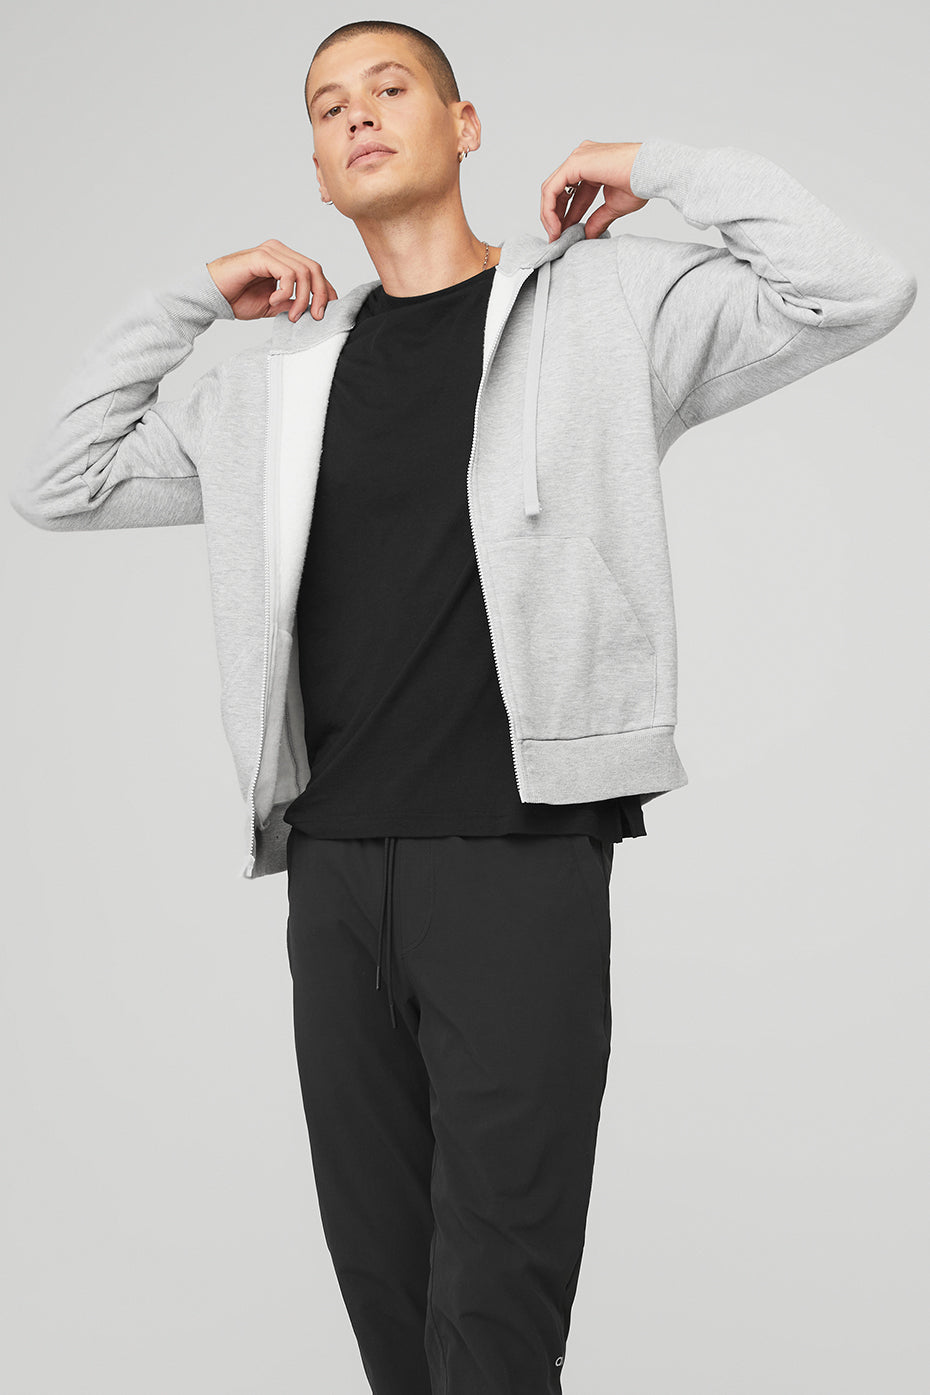 Buy Alo Accolade Hoodie - Athletic Heather Grey At 25% Off